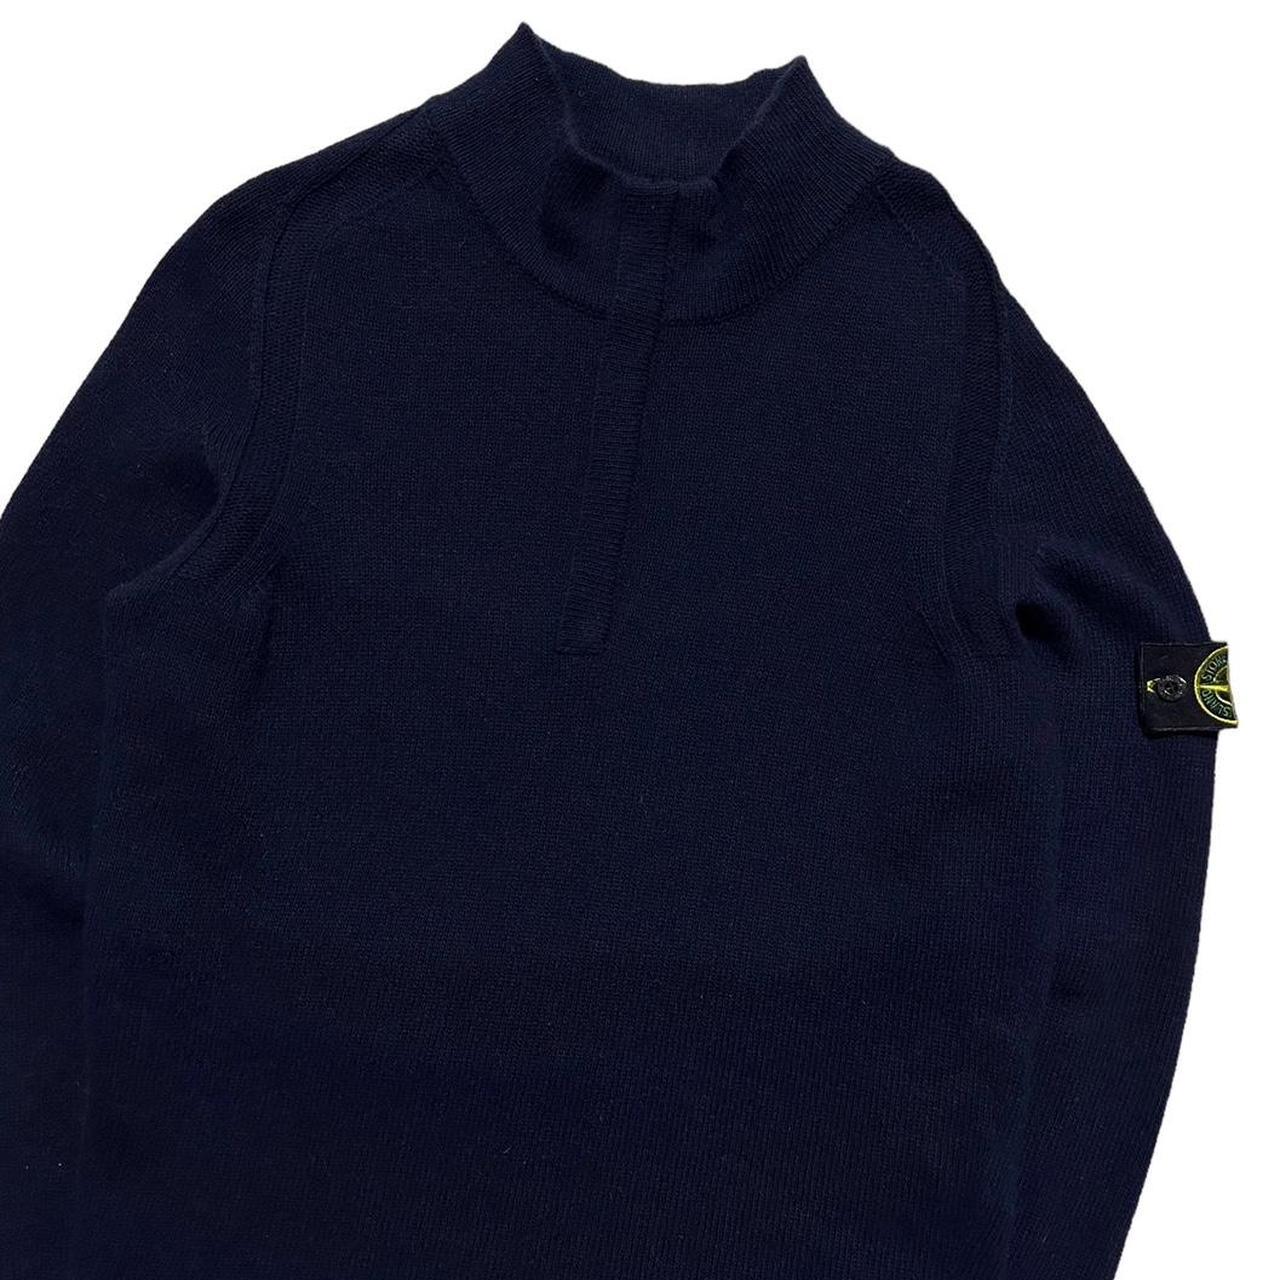 Stone Island Navy Quarter Zip Pullover - Known Source